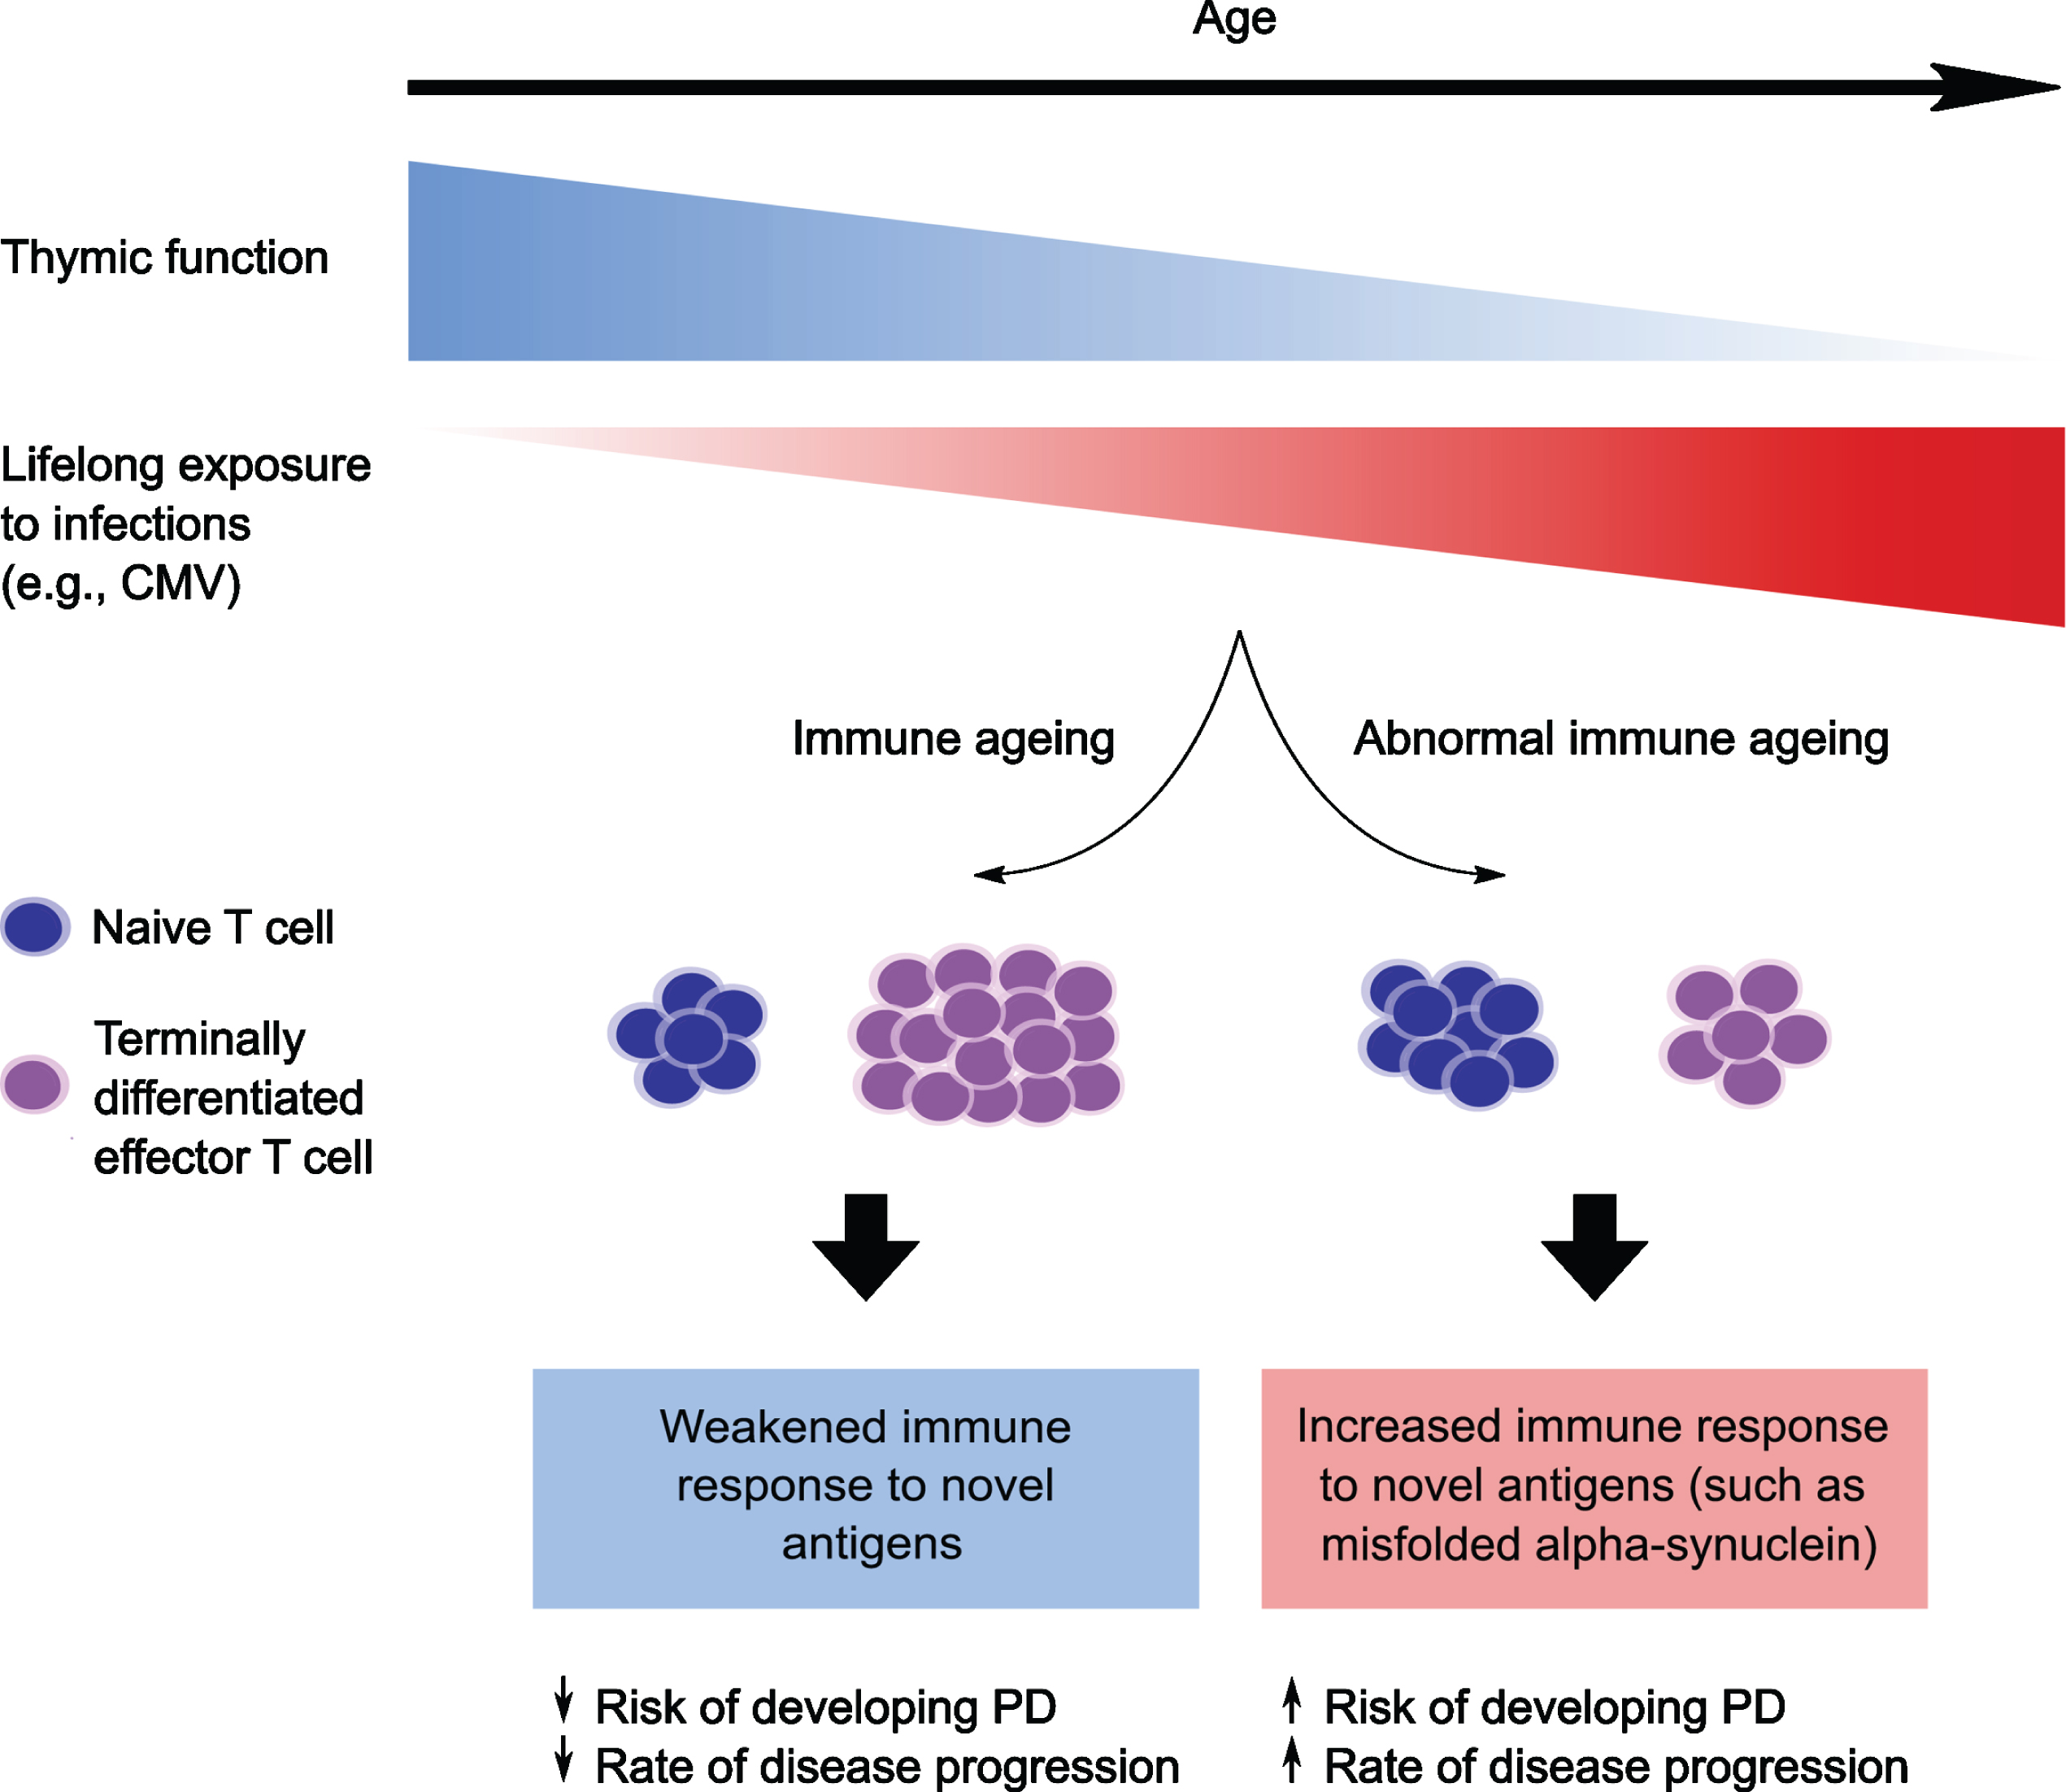 Schematic illustration showing a hypothesized relationship between immunosenescence and Parkinson’s disease risk/progression. With advancing age there is progressive decline in the size and function of the thymus gland (thymic involution), as well as increased exposure to viruses such as cytomegalovirus. This leads to immunosenescence, characterized by a reduction in antigen-inexperienced naïve T cells and an increase in “senescent” terminally differentiated effector T cells (TEMRA). The senescent shift is associated with a weakened immune response to novel antigens. However, in people who are predisposed to develop Parkinson’s disease, the typical age-associated shift towards senescence in the CD8 T cell population may be attenuated, with a reduced accumulation of CD8 TEMRA T cells in these individuals. This could lead to a heightened immune response to newly encountered antigens (such as misfolded alpha-synuclein), thereby increasing the risk of developing Parkinson’s and/or promoting more rapid disease progression. CMV, Cytomegalovirus; PD, Parkinson’s disease.